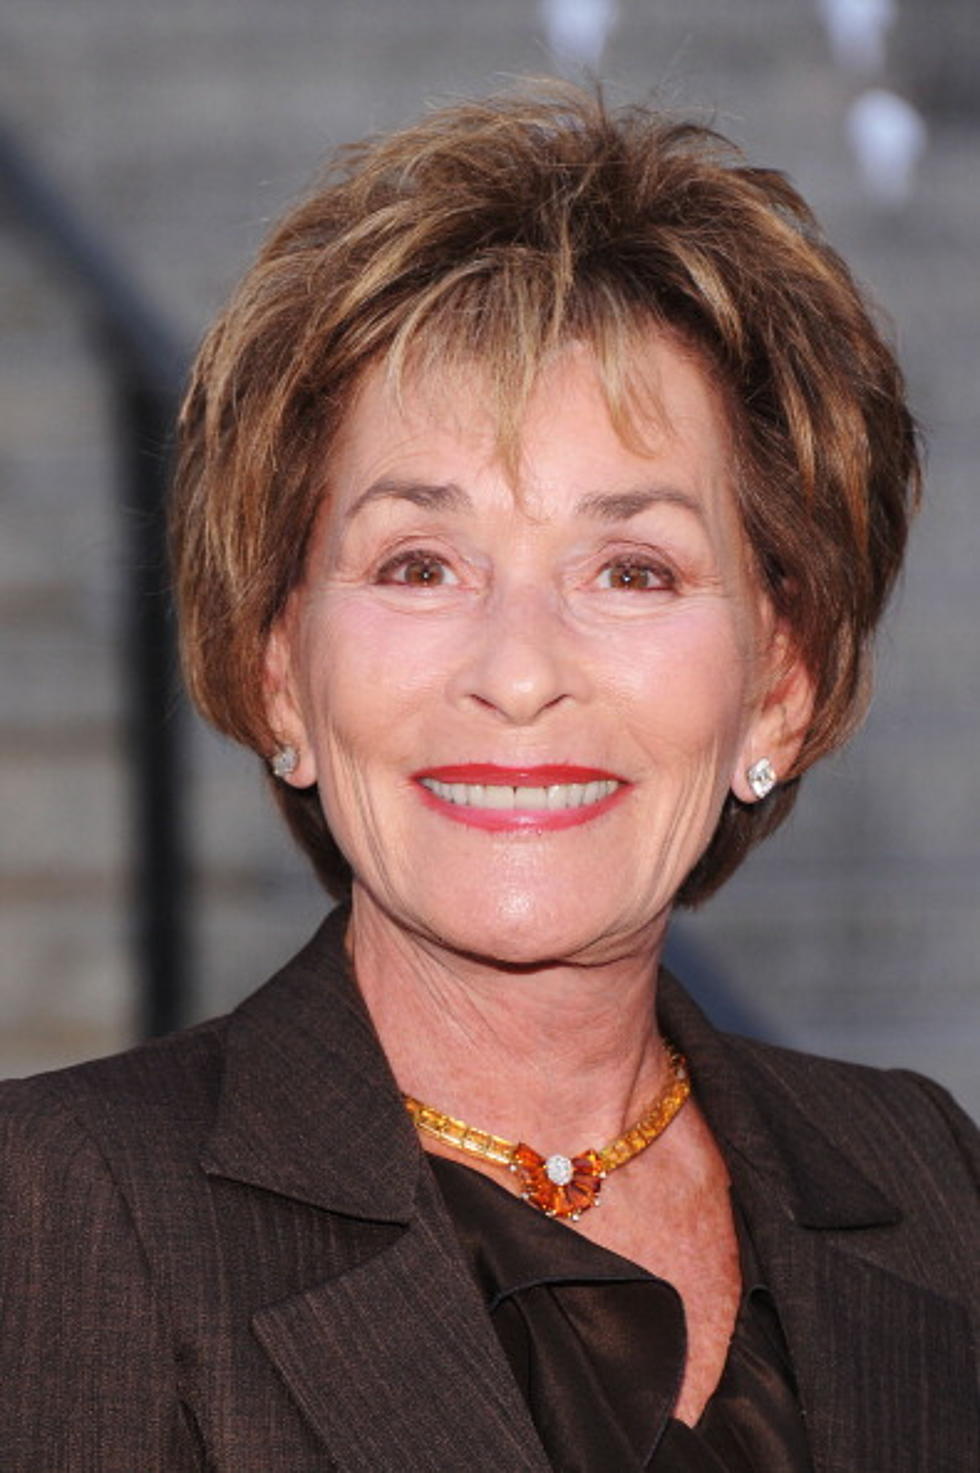 Judge Judy Goes to Night Court in New CBS Prime-Time Special